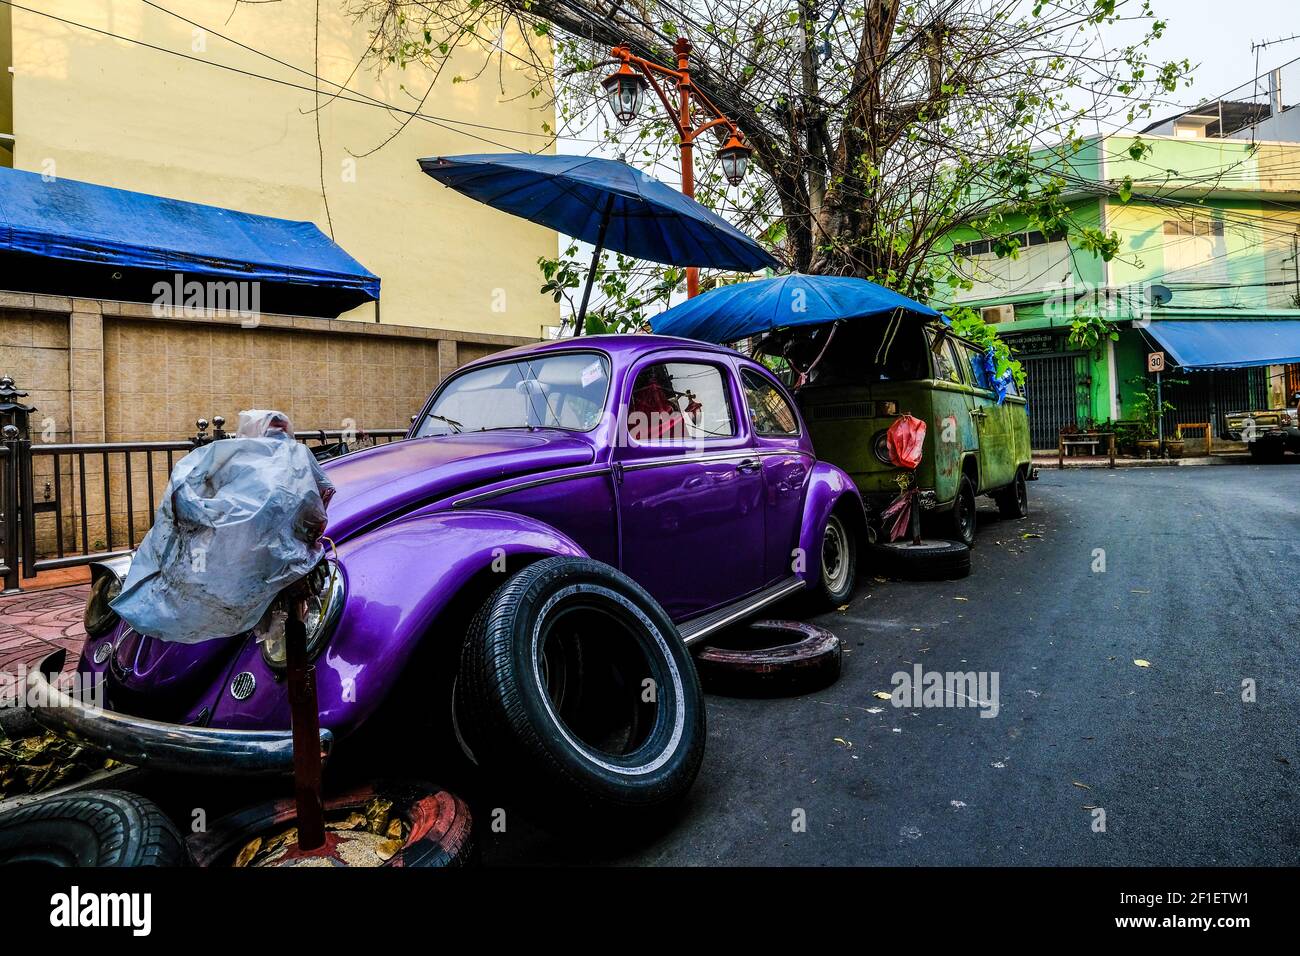 An old Volksagen Beetle stands in a street in the Chinatown are of Bangkok, Thailand Stock Photo